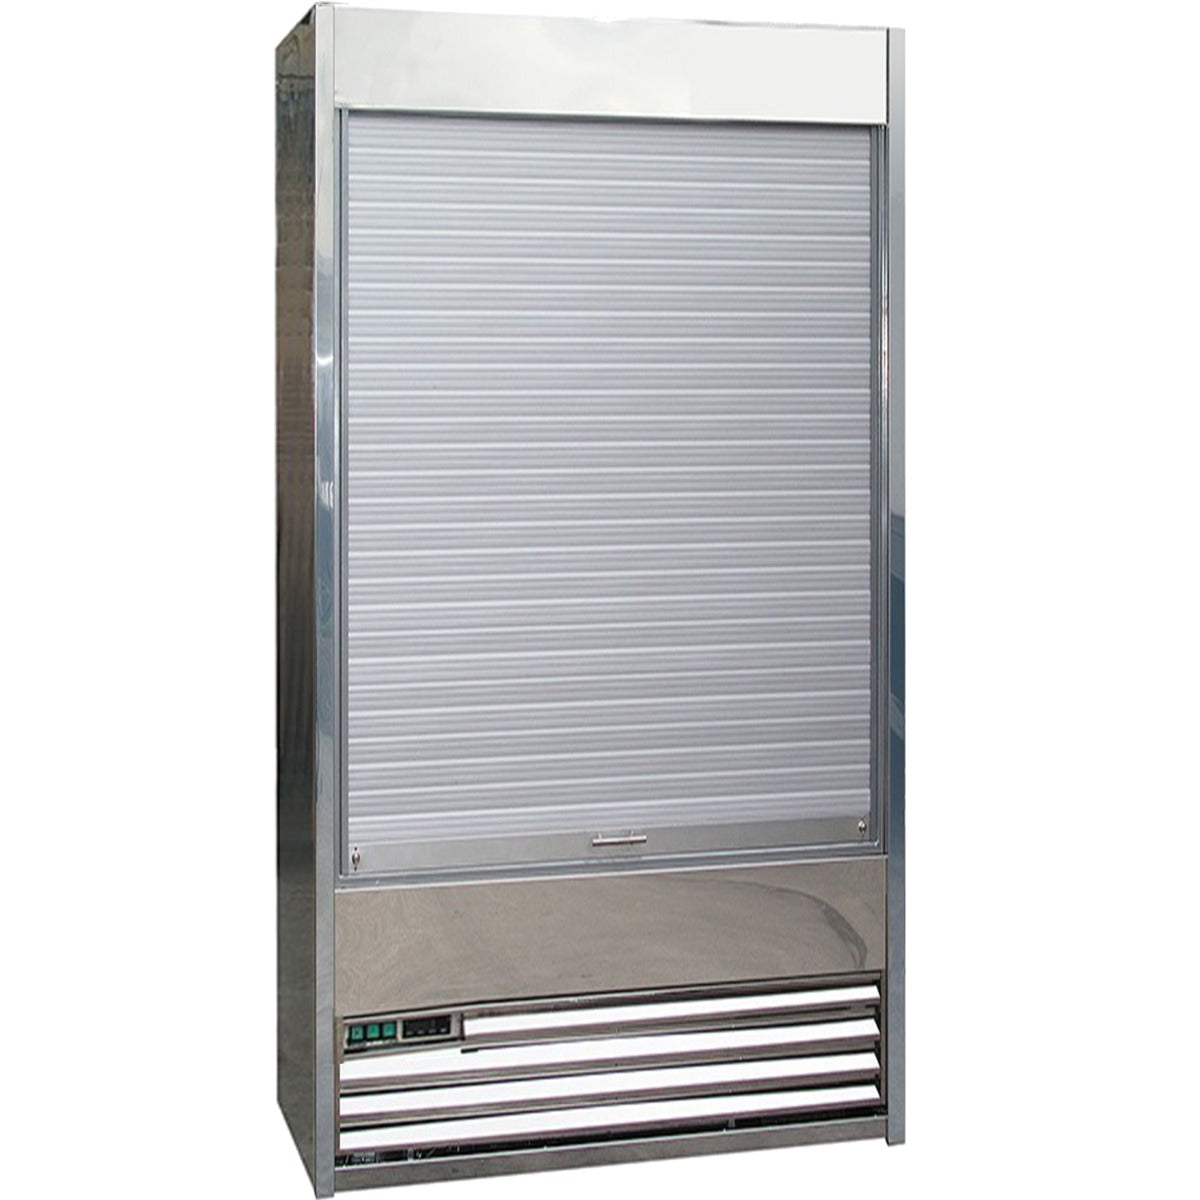 Frost-Tech Stainless Steel Tiered Display 1000mm Wide